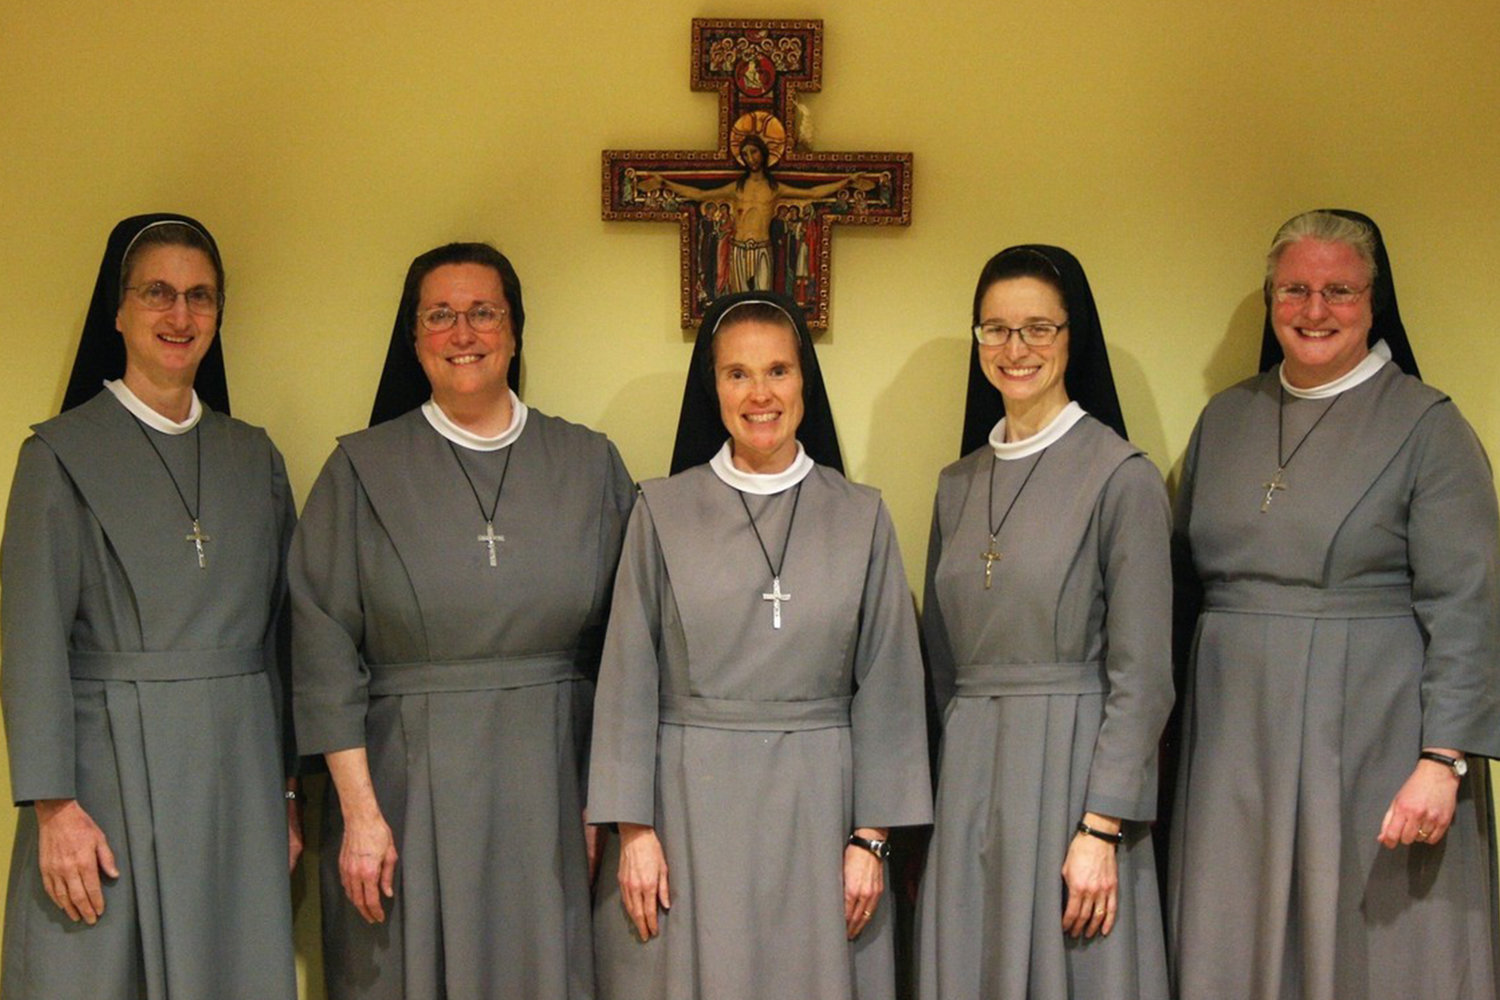 Rich Fountain native Mother M. Mediatrix Bexten FSGM (center), newly installed provincial superior of the St. Elizabeth province of the Sisters of St. Francis of the Martyr St. George, gathers with the new provincial council after their installation on March 25, the Solemnity of the Annunciation. With her are council members Sister M. Kateri Hawley, Sister M. Mikela Meidl, Sister M. Elise Mierendorf (vicaress), and Sister M. Angelica Neumann.